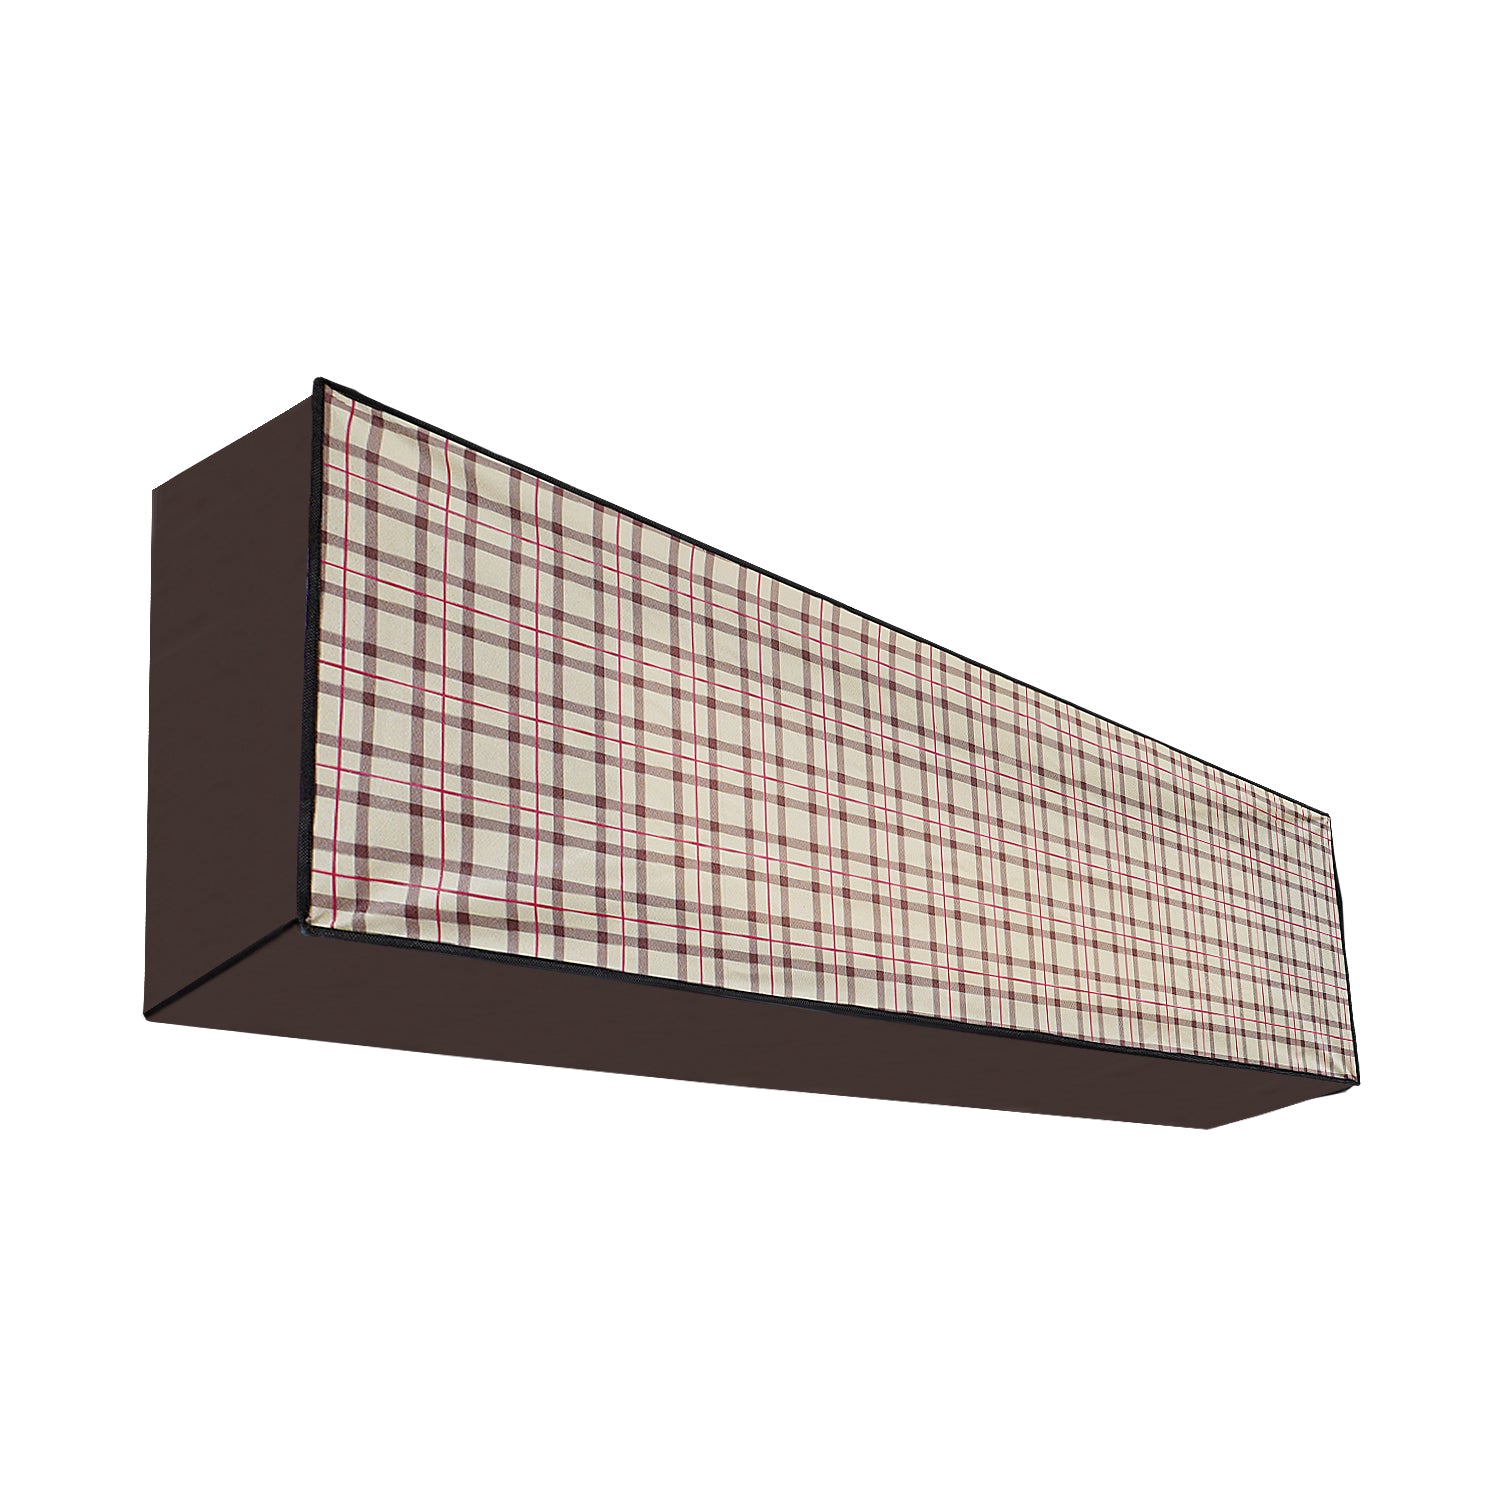 Waterproof and Dustproof Split Indoor AC Cover, CA03 - Dream Care Furnishings Private Limited